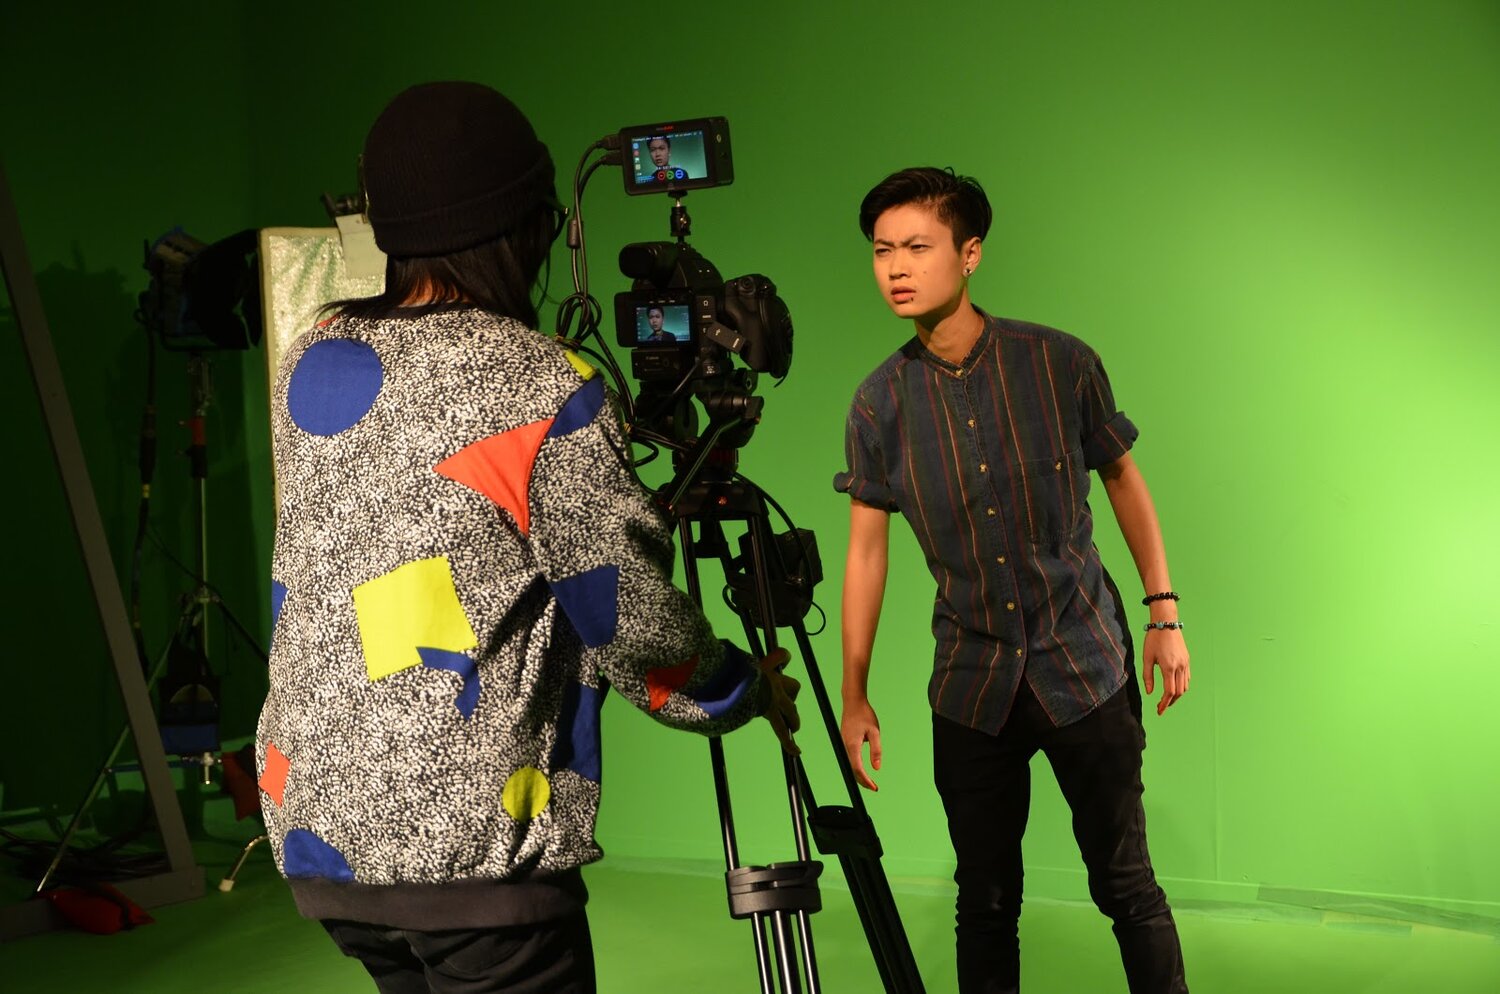  Actor Ck is standing in front of a green screen, looking into a camera, which is operated by Melinda James. 